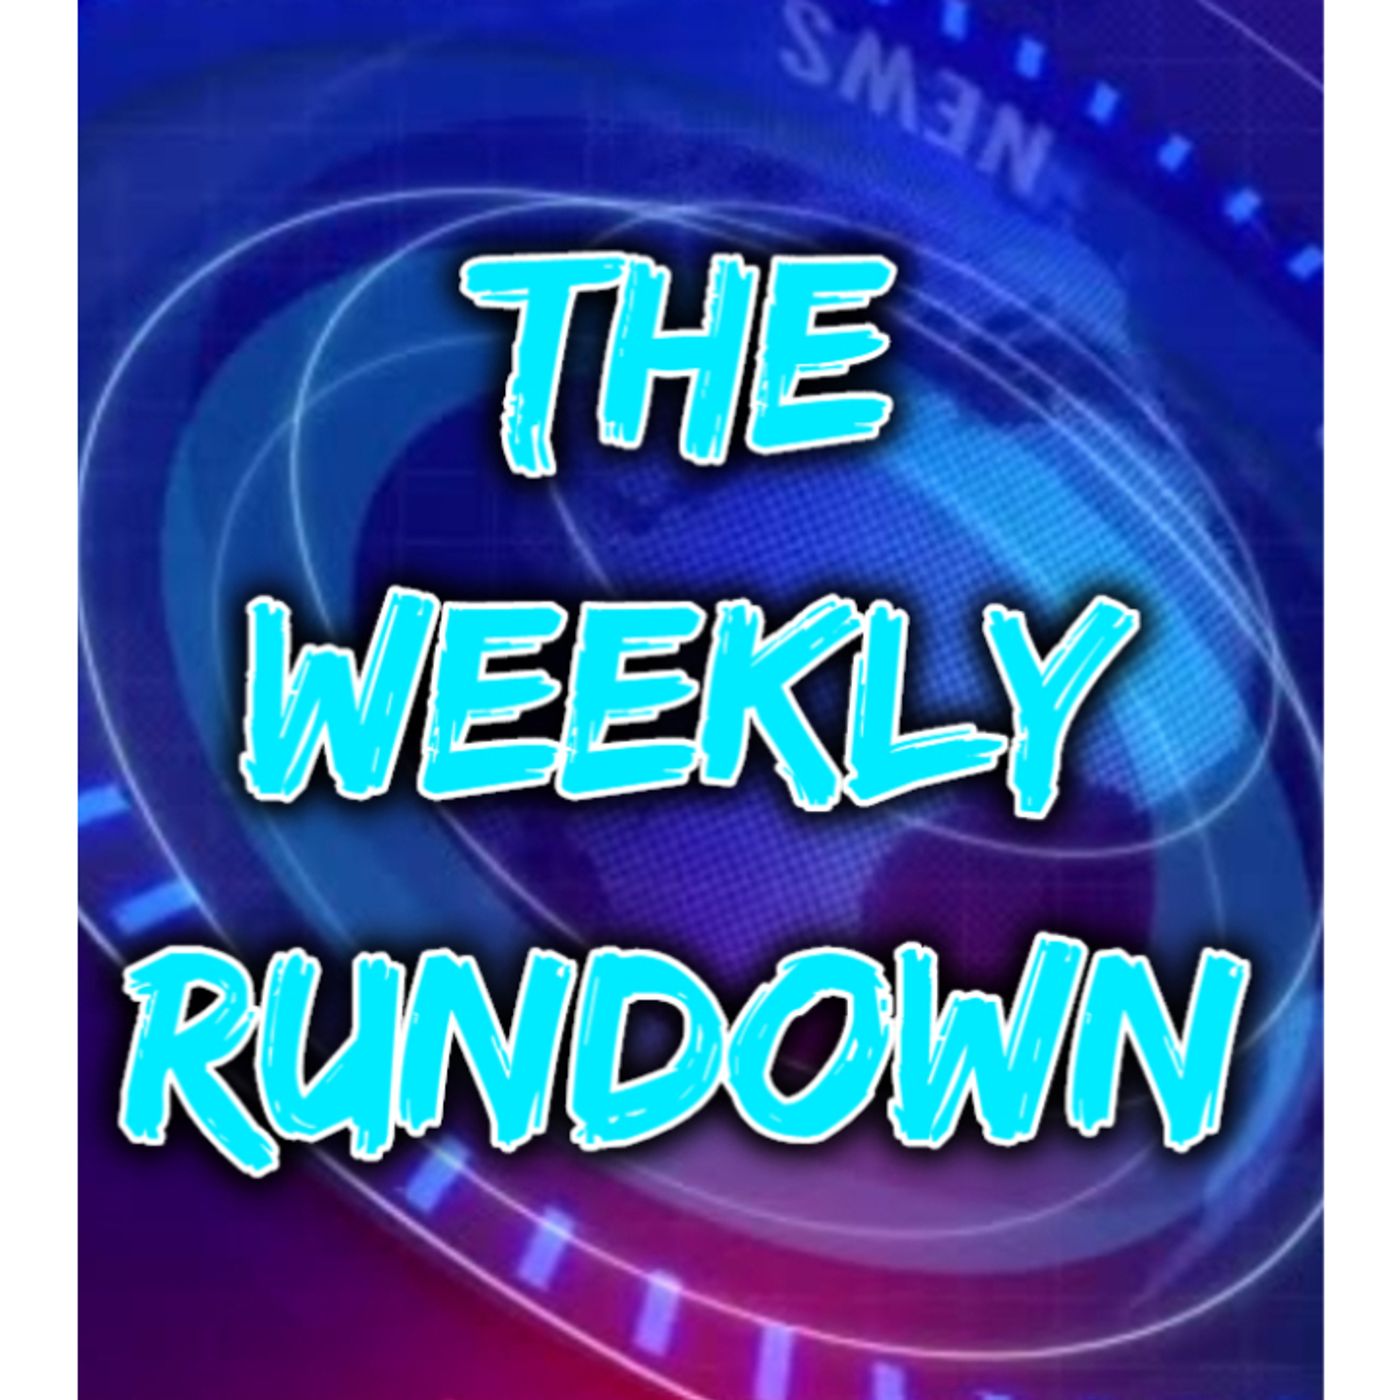 Weekly Rundown Ep. 2.4: Bullying Video Raises Questions, Was It A Scam?